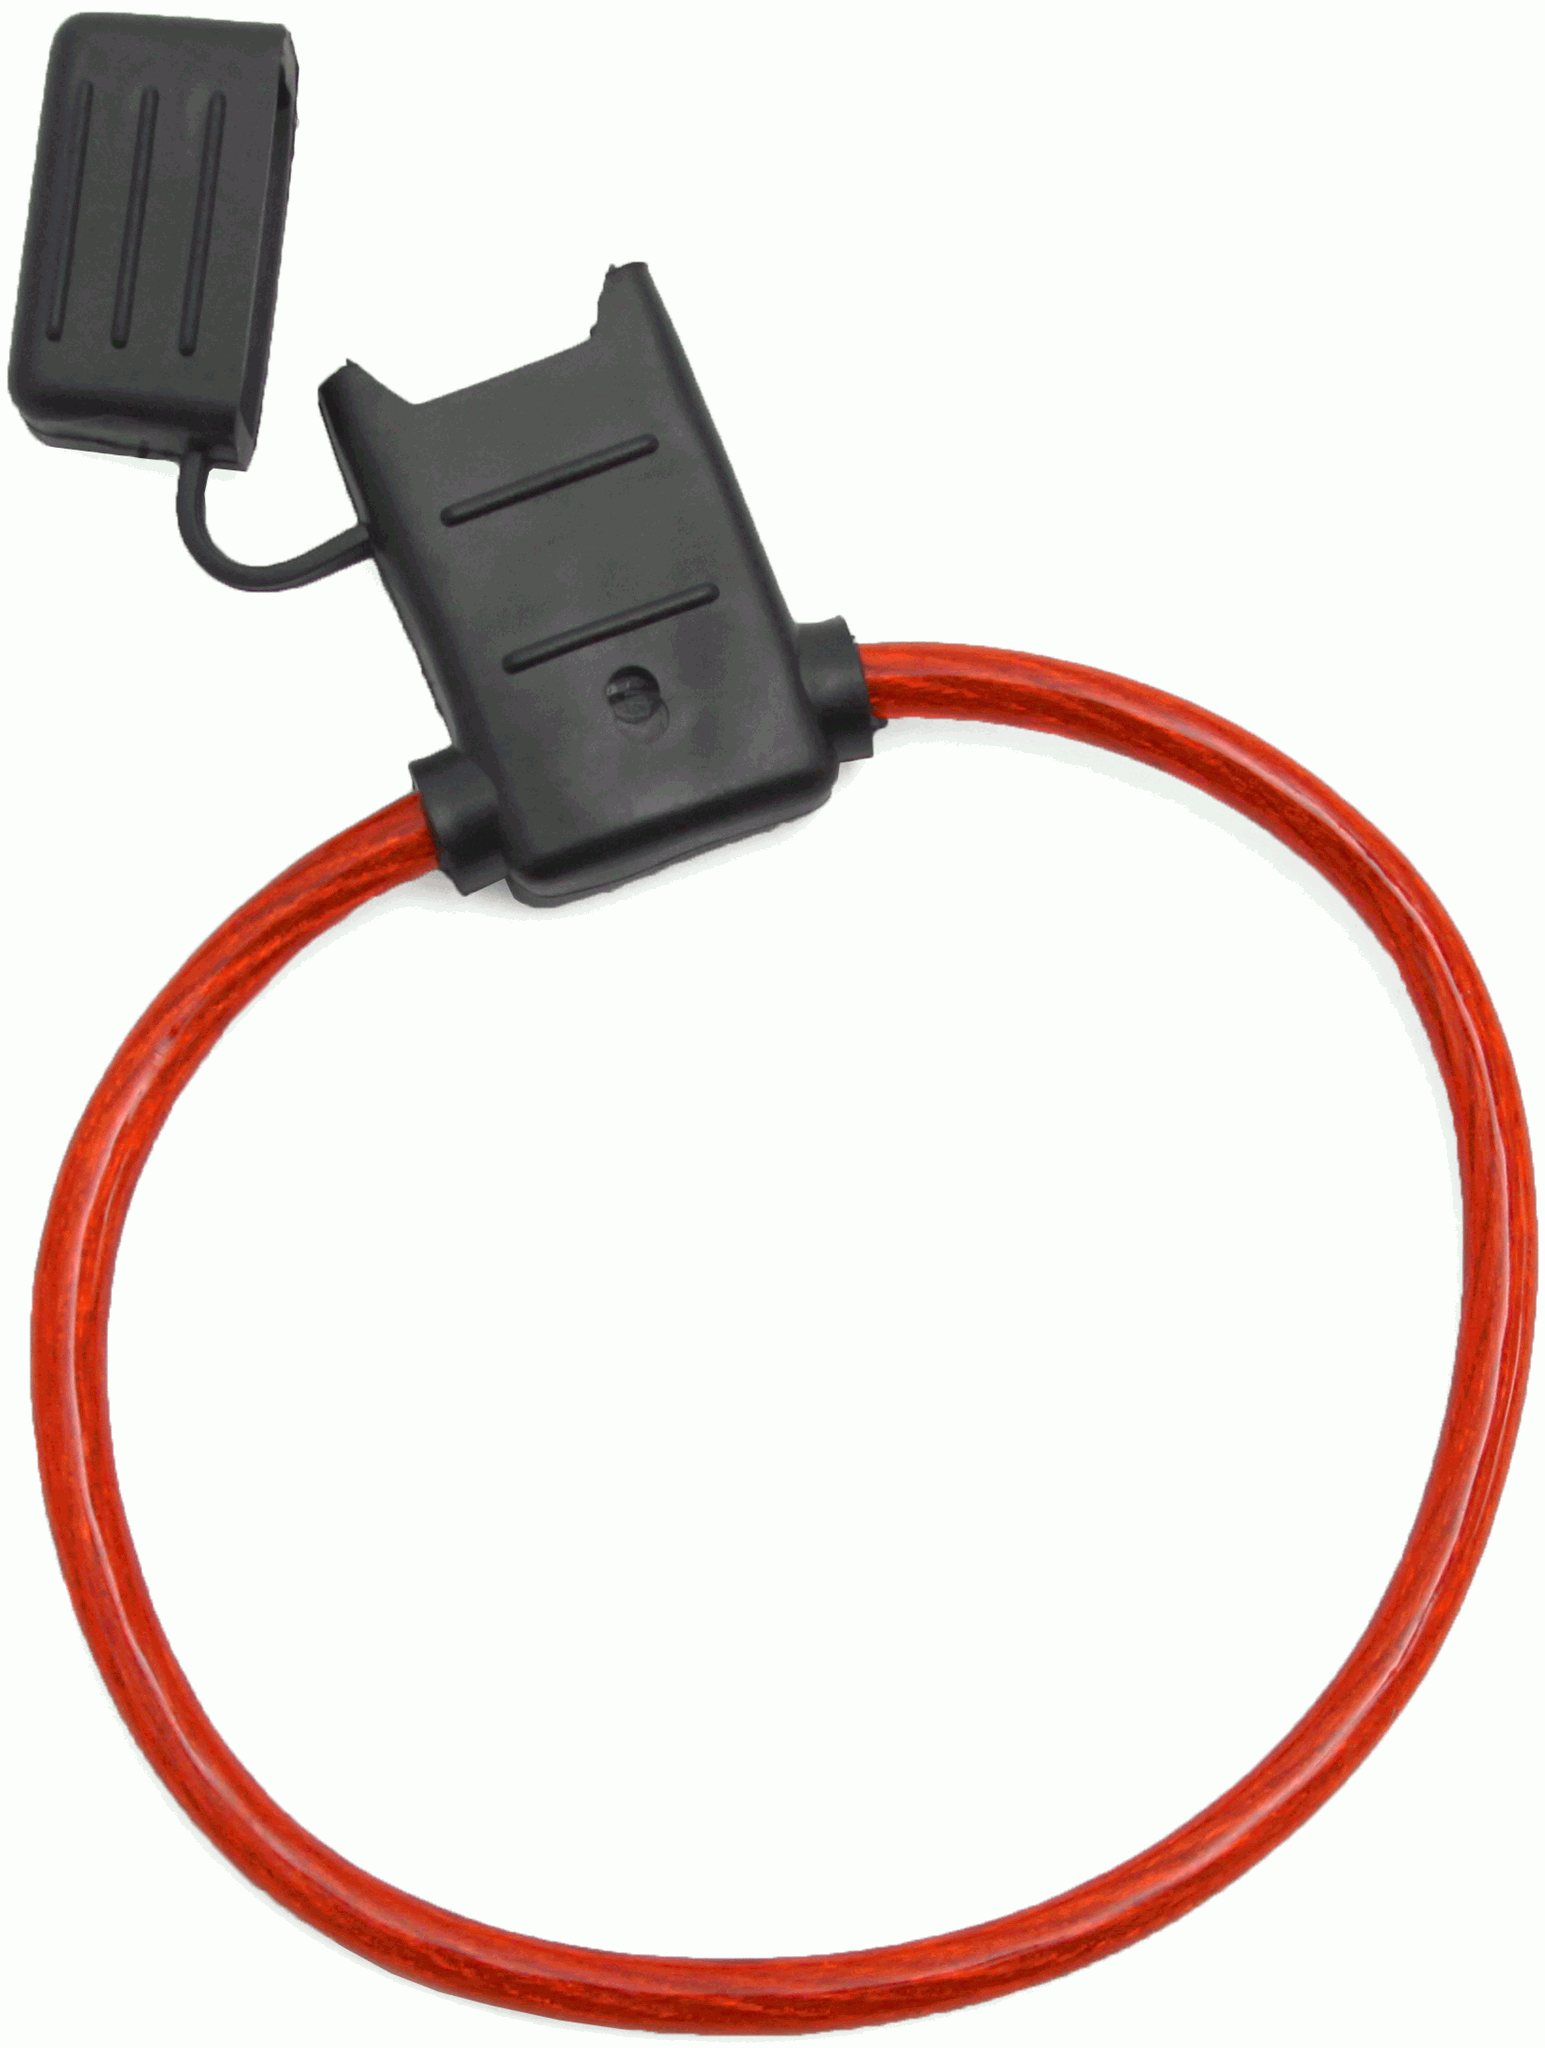 10/pack ATCWP-10 ATC/ATO Fuse Holder with 10 Gauge Red Waterproof Power Cable 